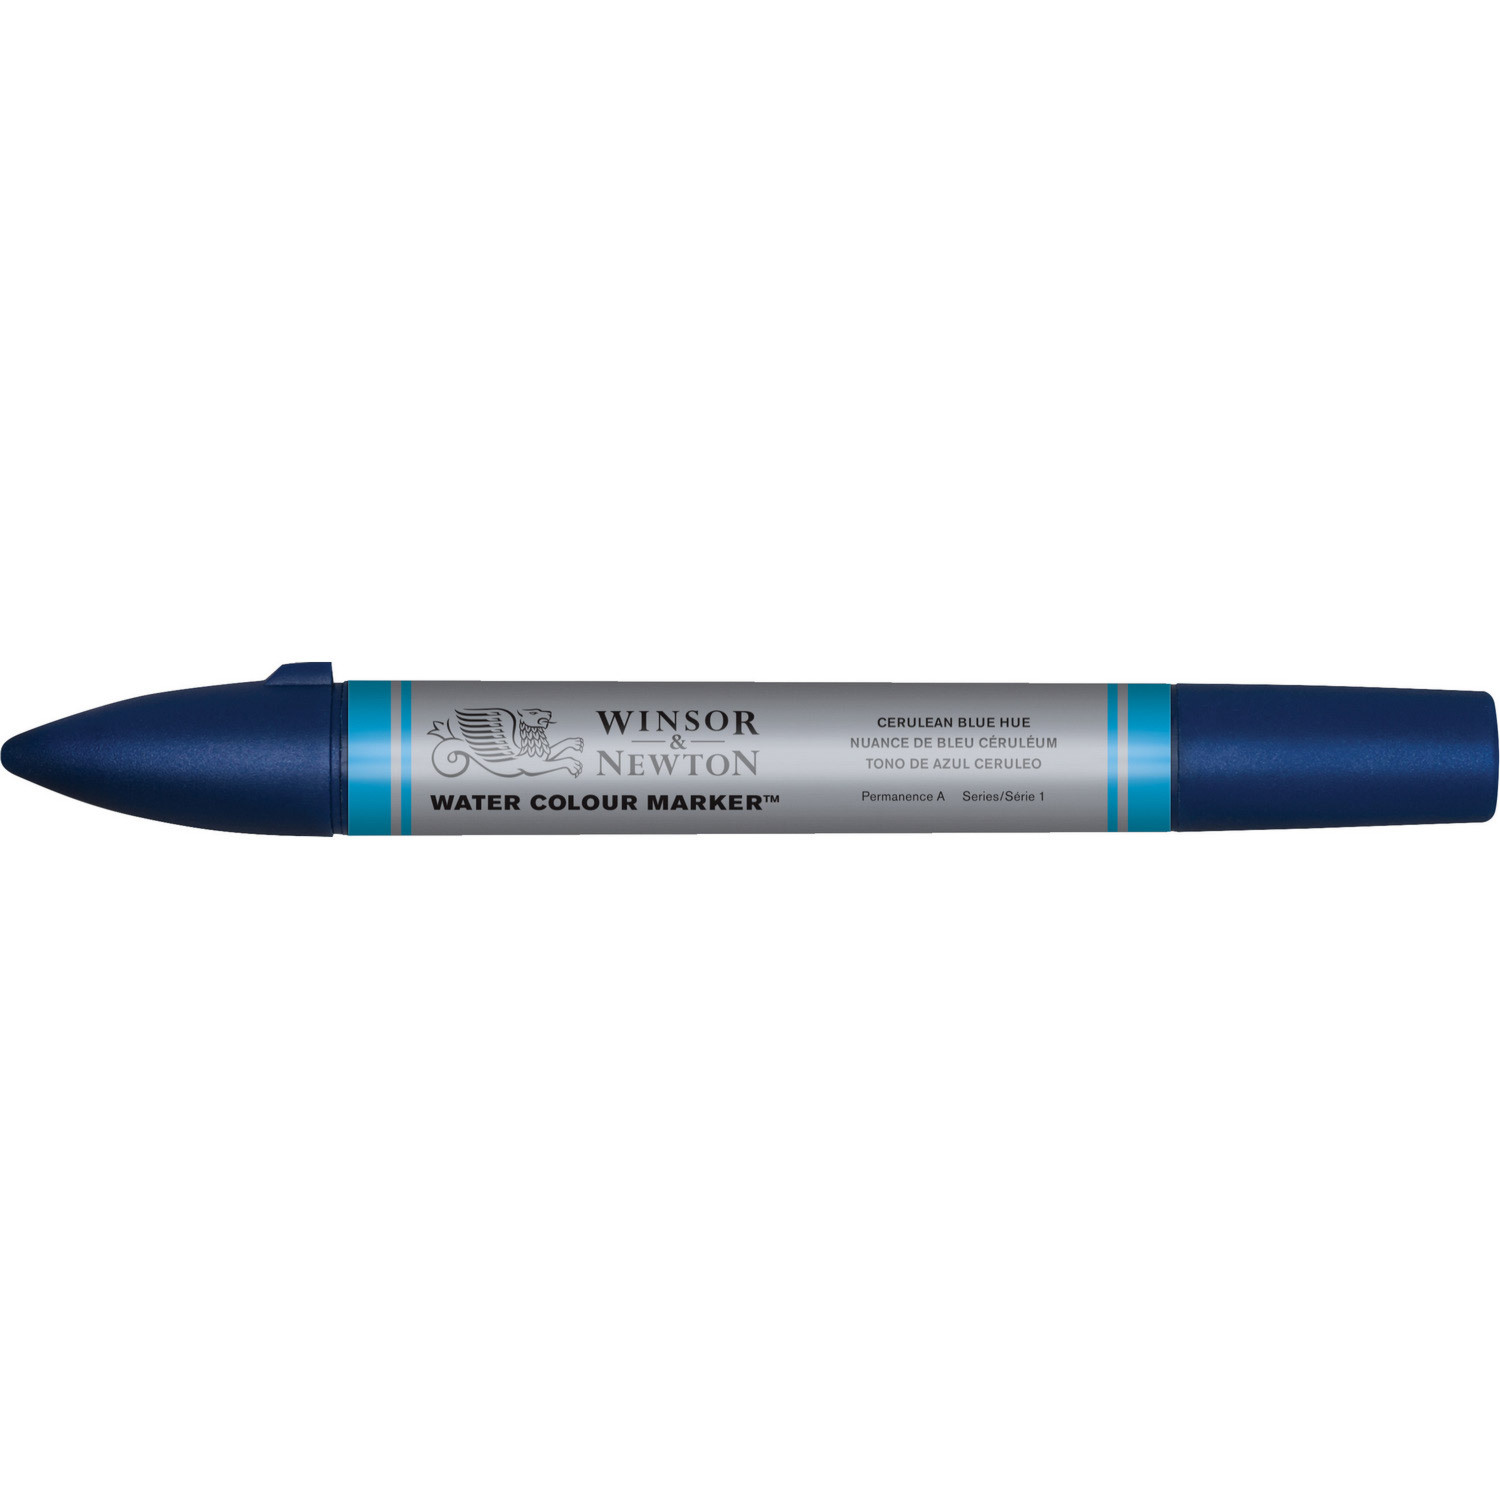 Winsor and Newton Water Colour Marker - Cerulean Blue Hue Image 1